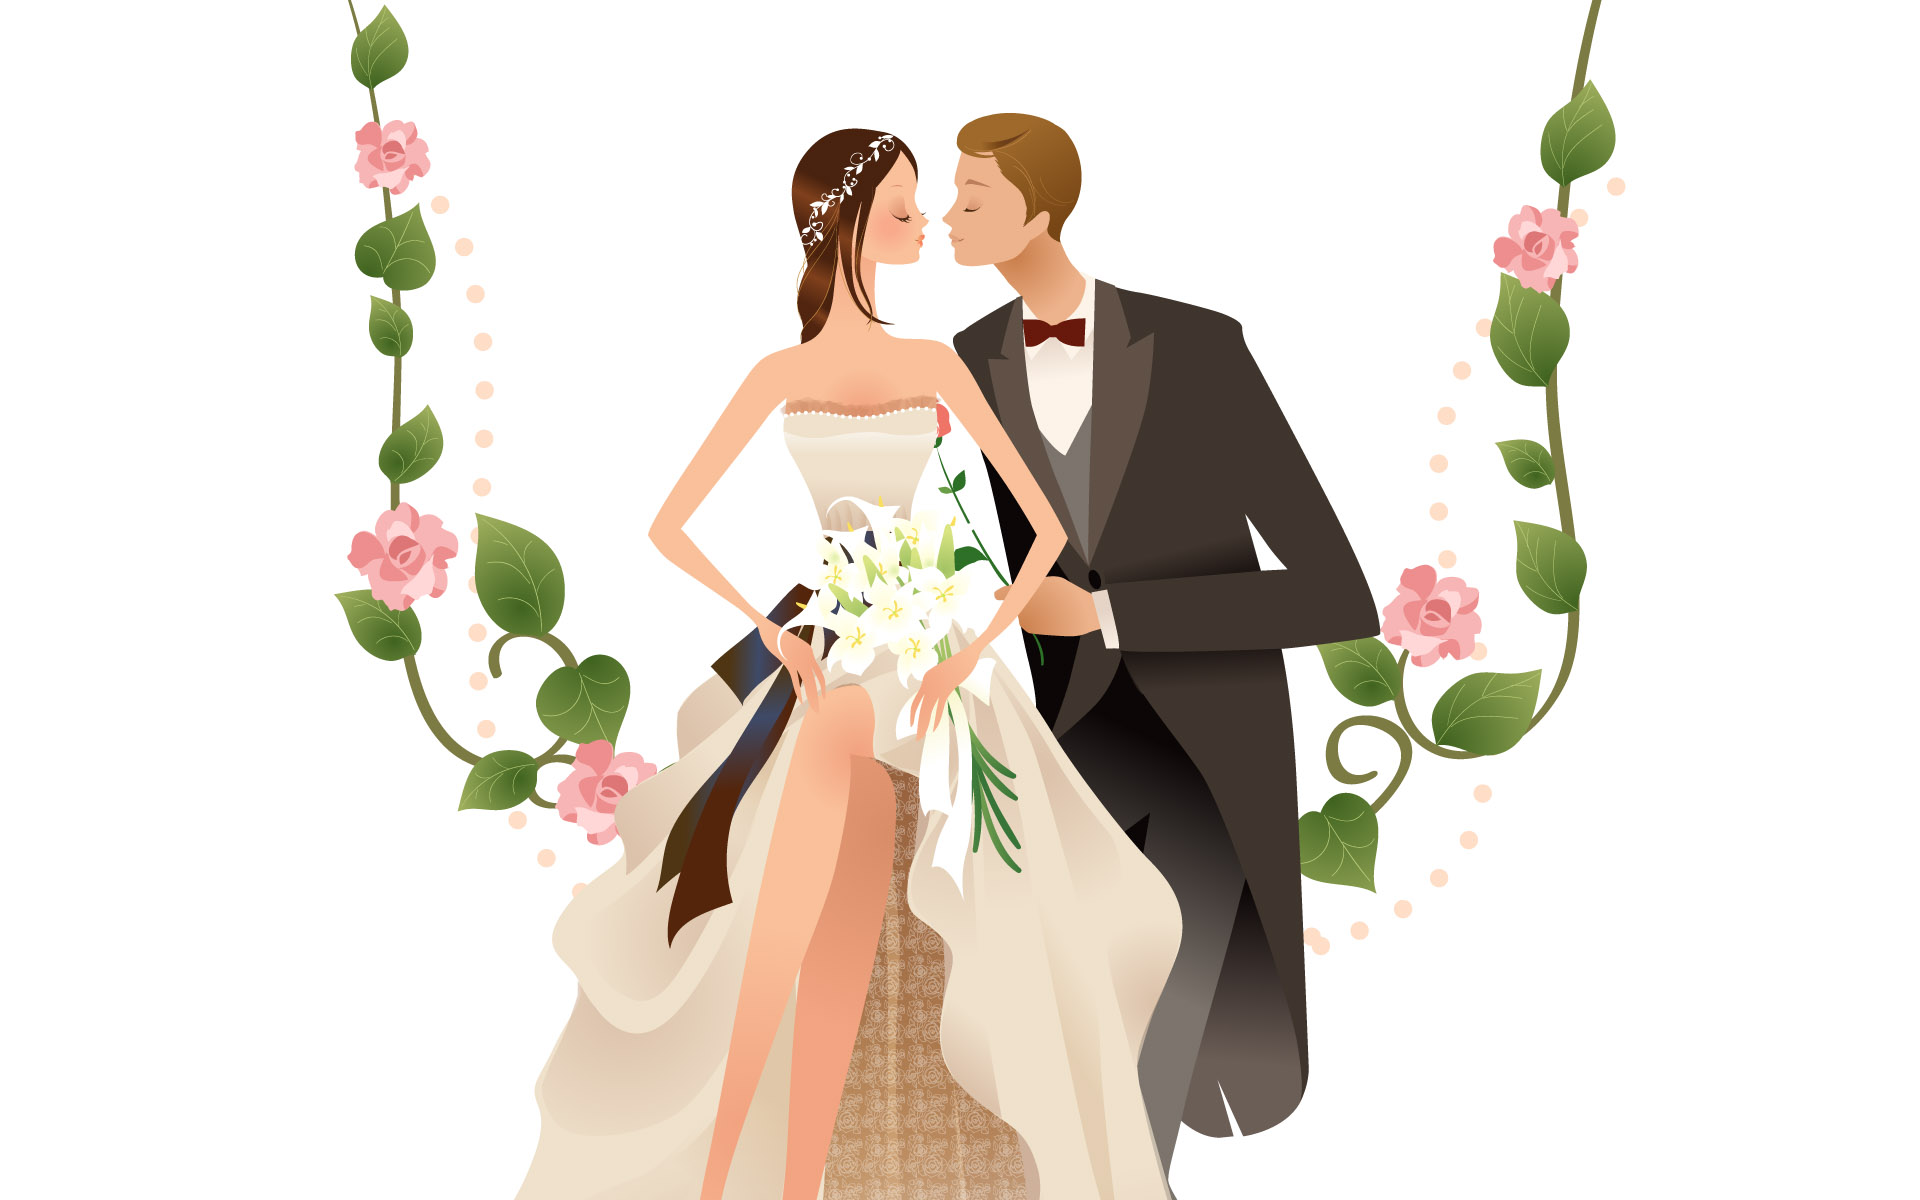 Free download Wedding Couple Cartoon Images Download Wedding Couple